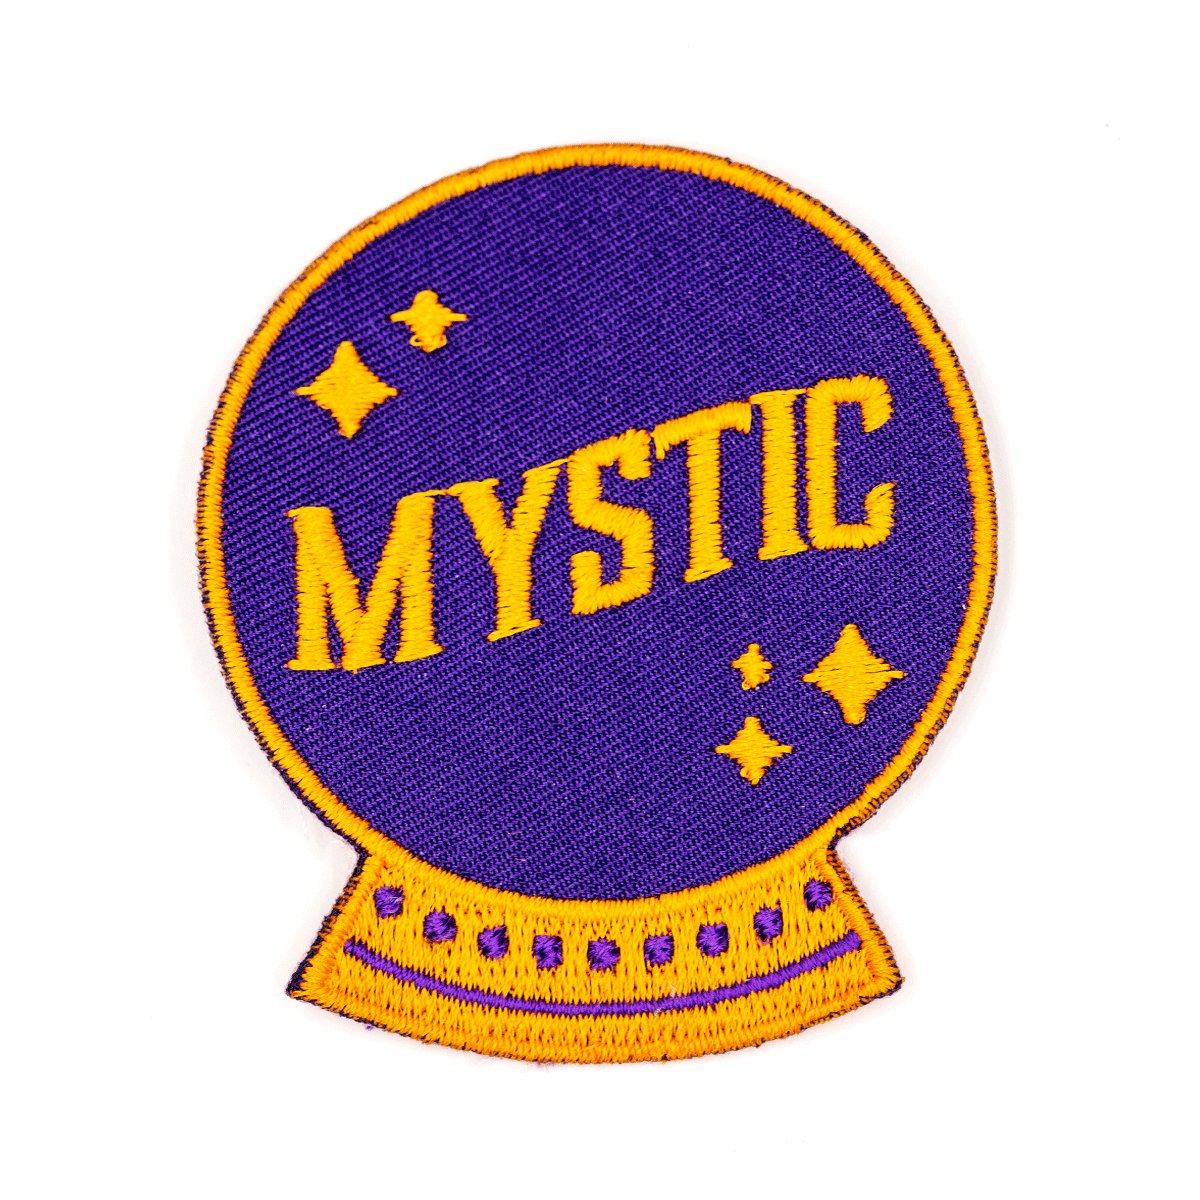 Mystic Crystal Ball Embroidered Iron-On Patch - The Mystics Club